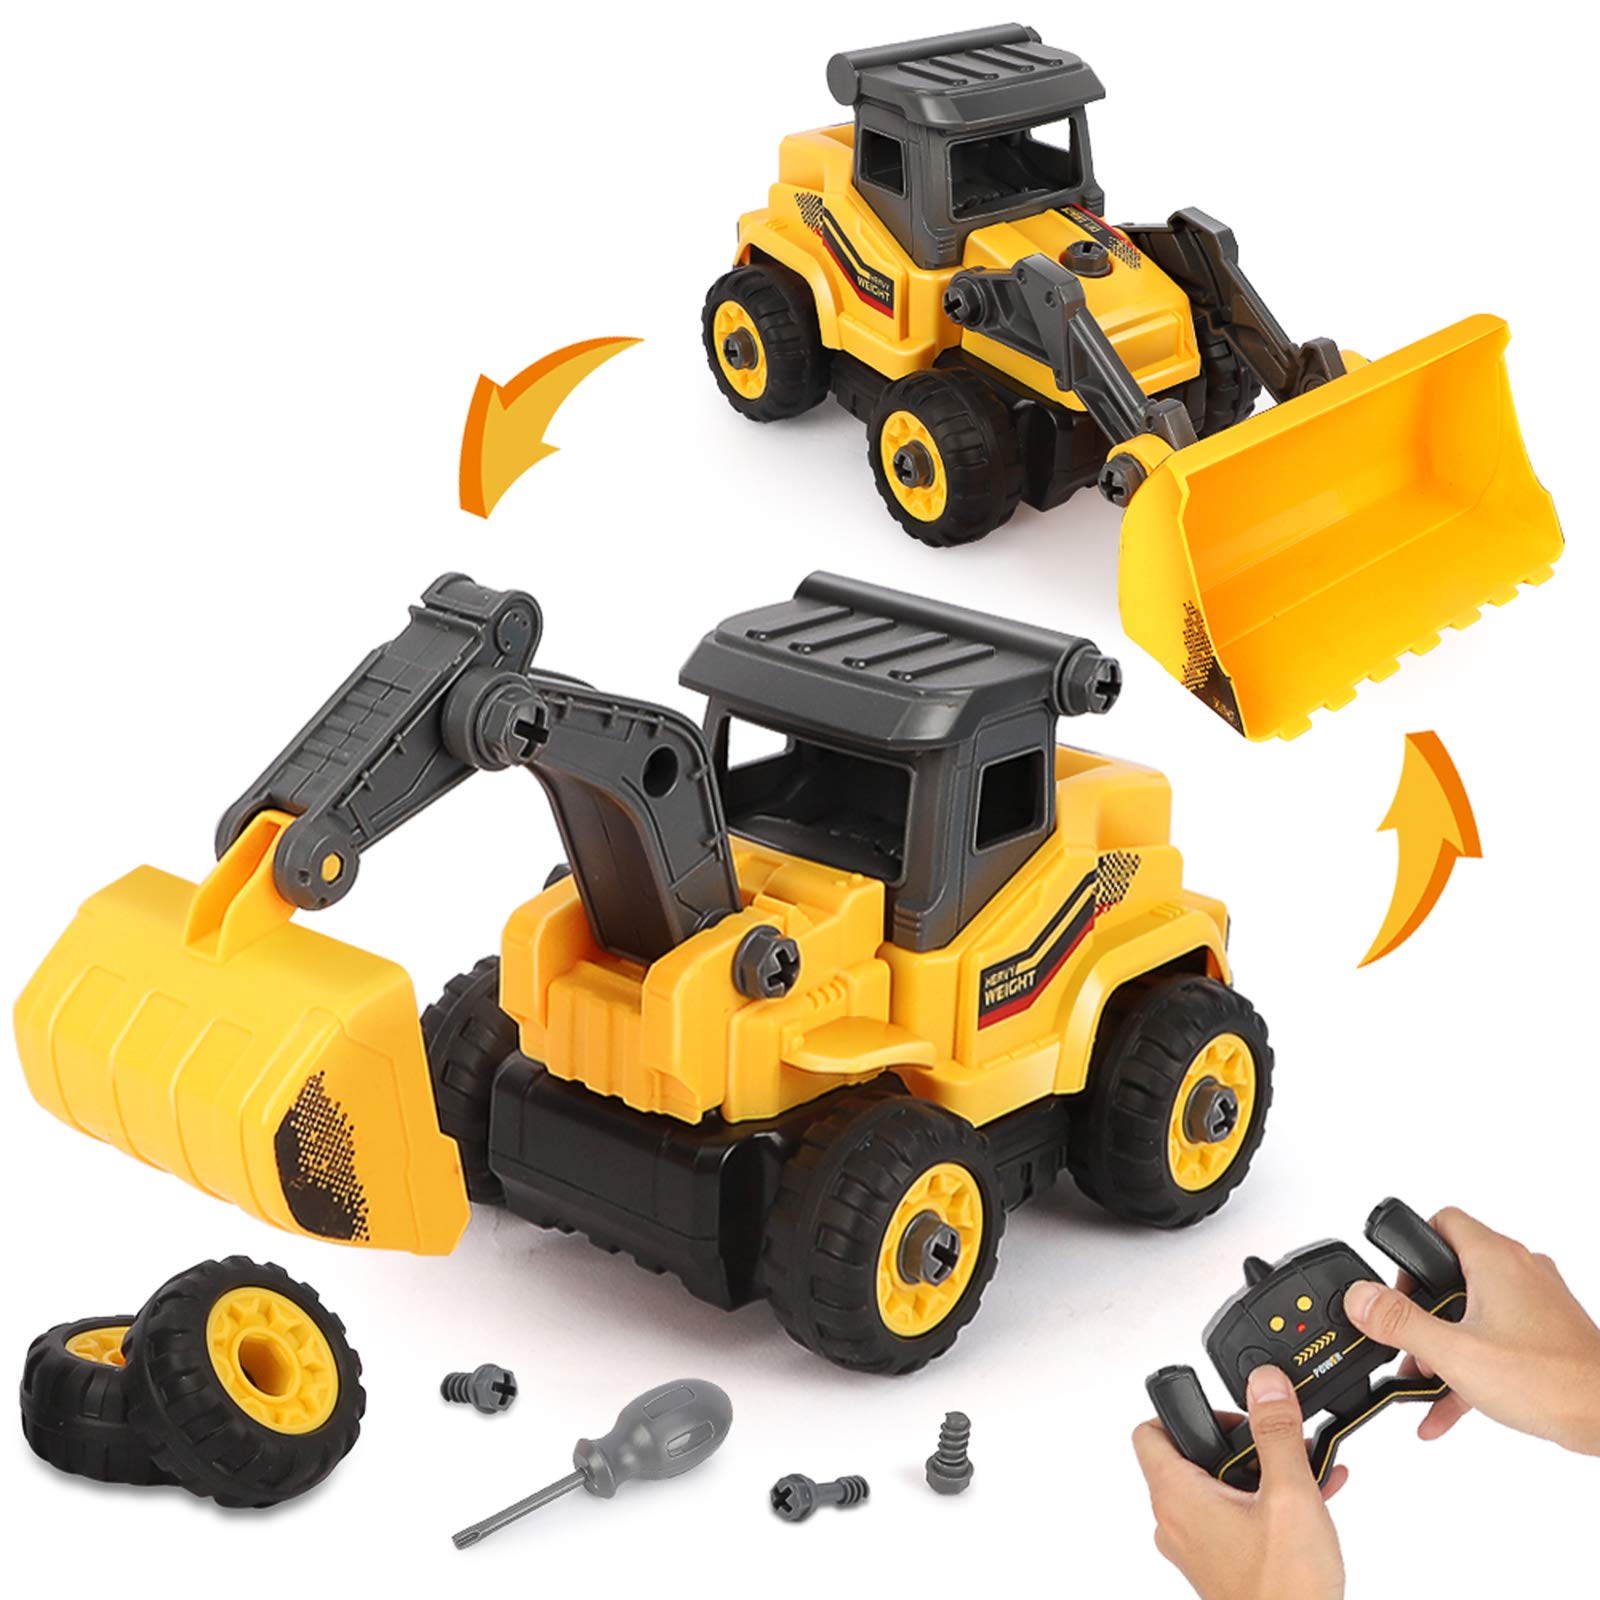 Short Lead Time for Remote Control Car For 3 Year Old - BeebeeRun Take Apart Construction Toys – Construction Trucks for Boys – 2 in 1 RC Construction Vehicles – Remote Control E...